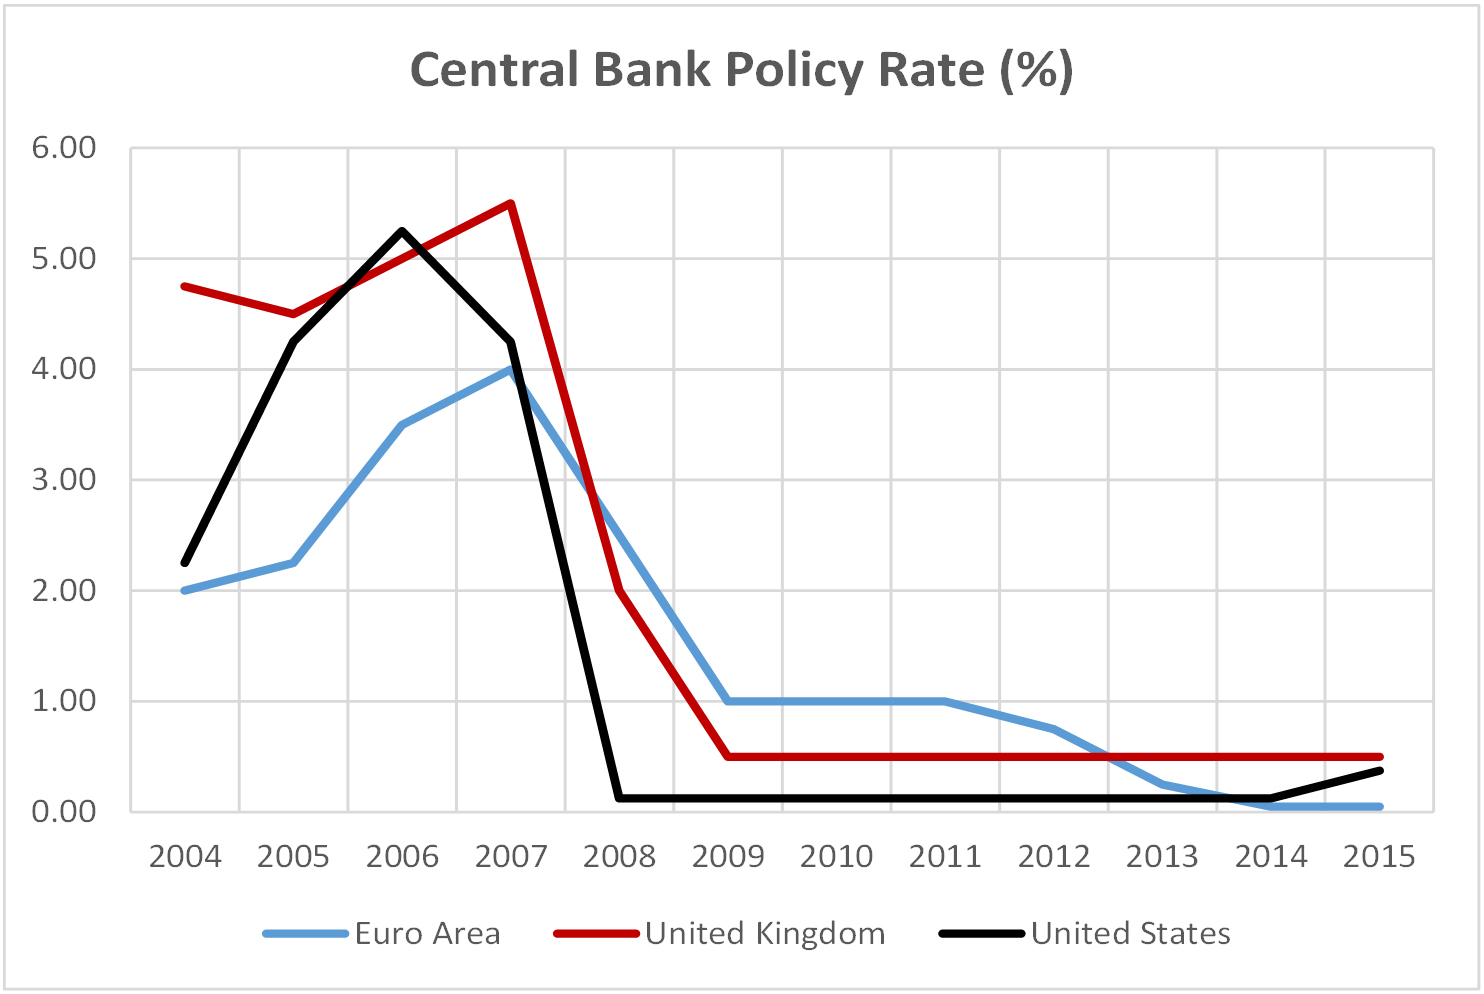 Chart 1.12 - Central Bank Policy Rate